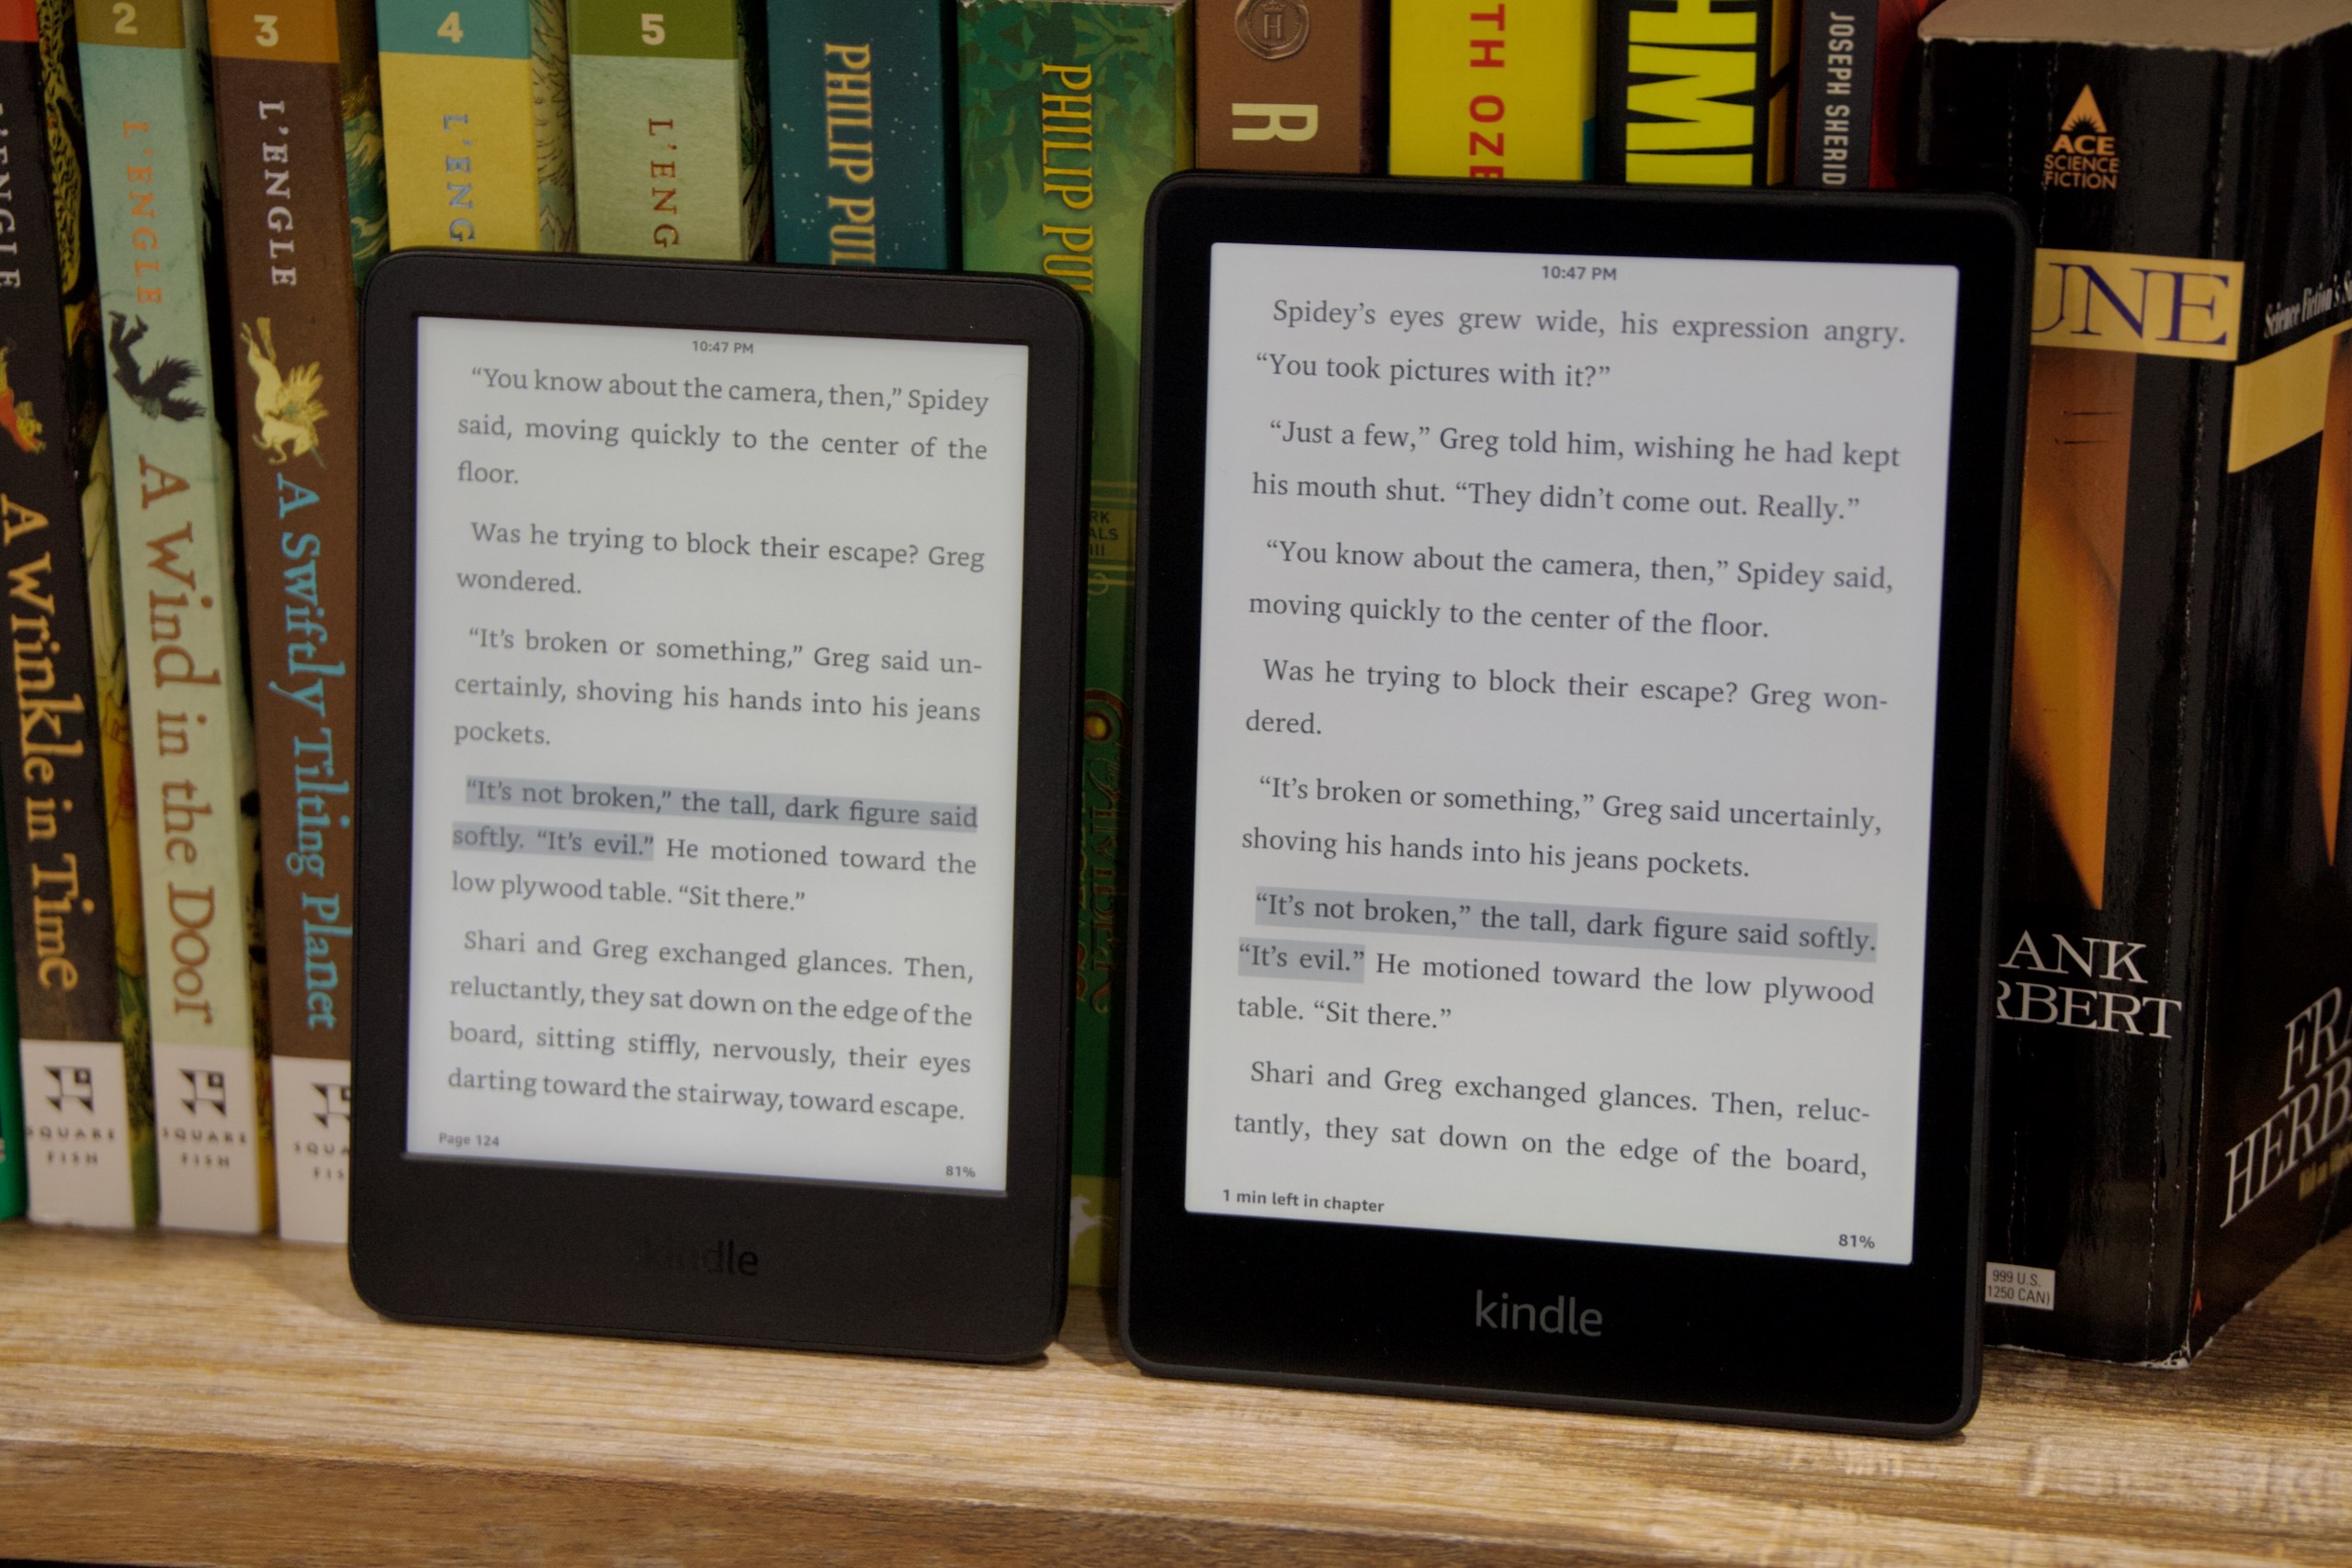 igennem Siege annoncere Review: Amazon's $100 Kindle is lightweight and cute, and it nails the  basics | Ars Technica